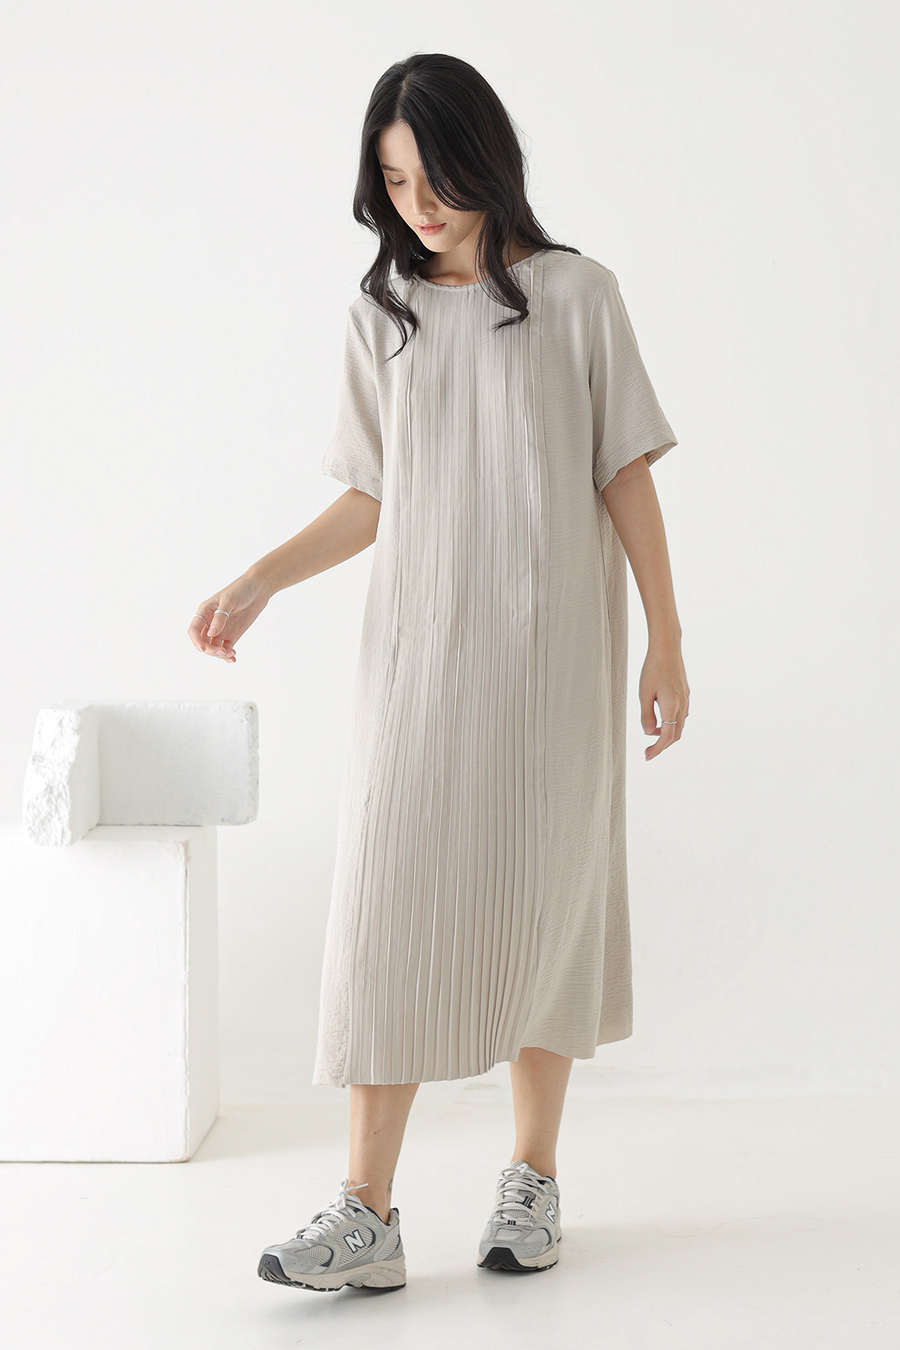 Feather Inlet Dress